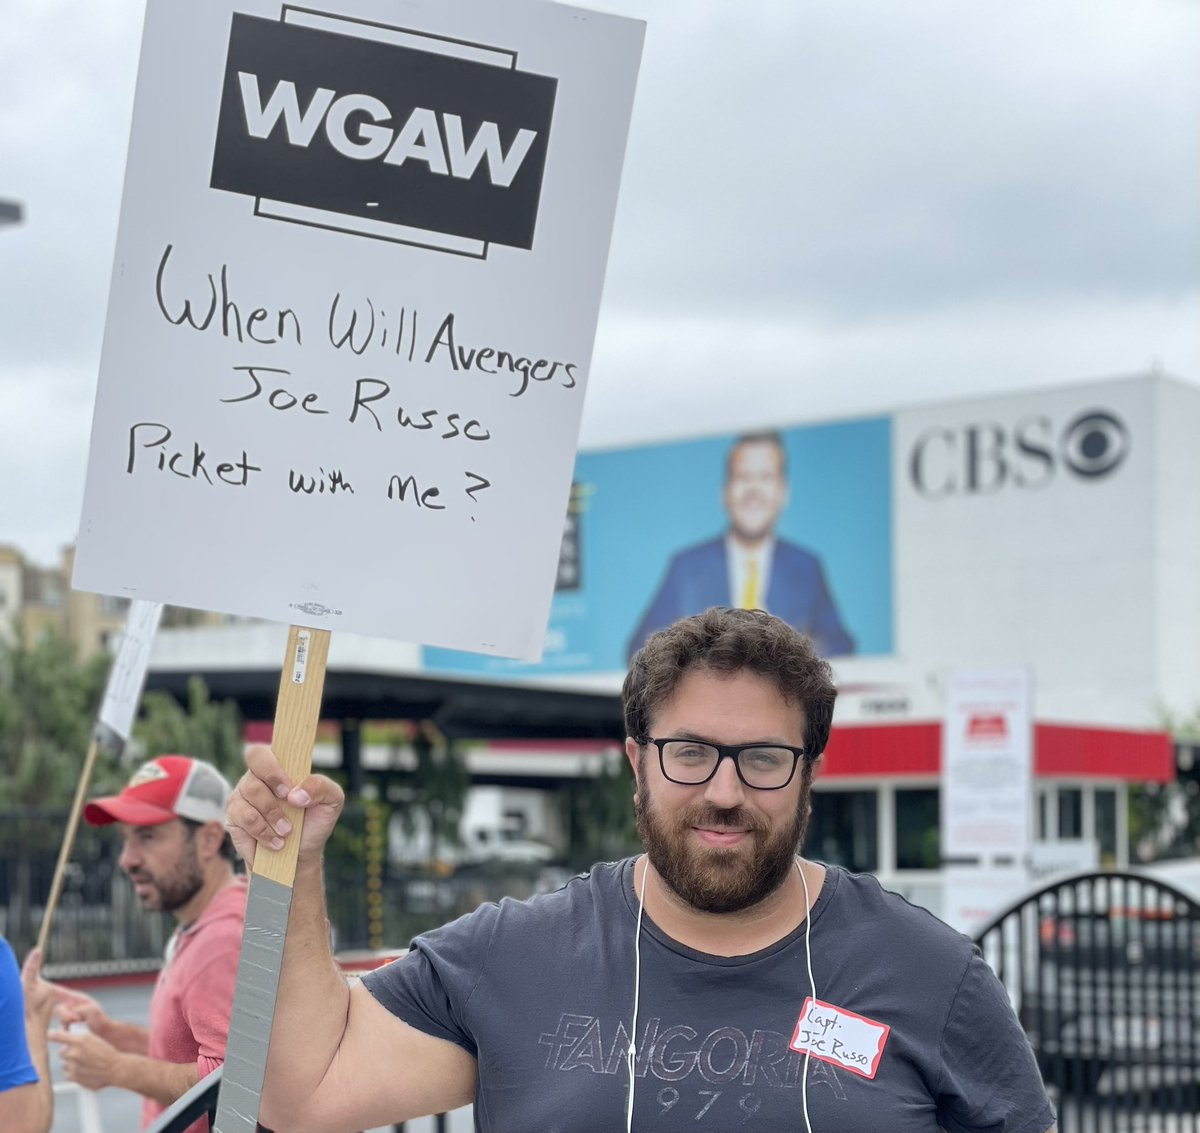 One year ago, the Writers Guild of America went on strike. It was a long, hard 148 day journey, but I made some incredible friends along the way and, together, we stood up to some of the most powerful companies in the world. I’ll always be proud of what we accomplished.